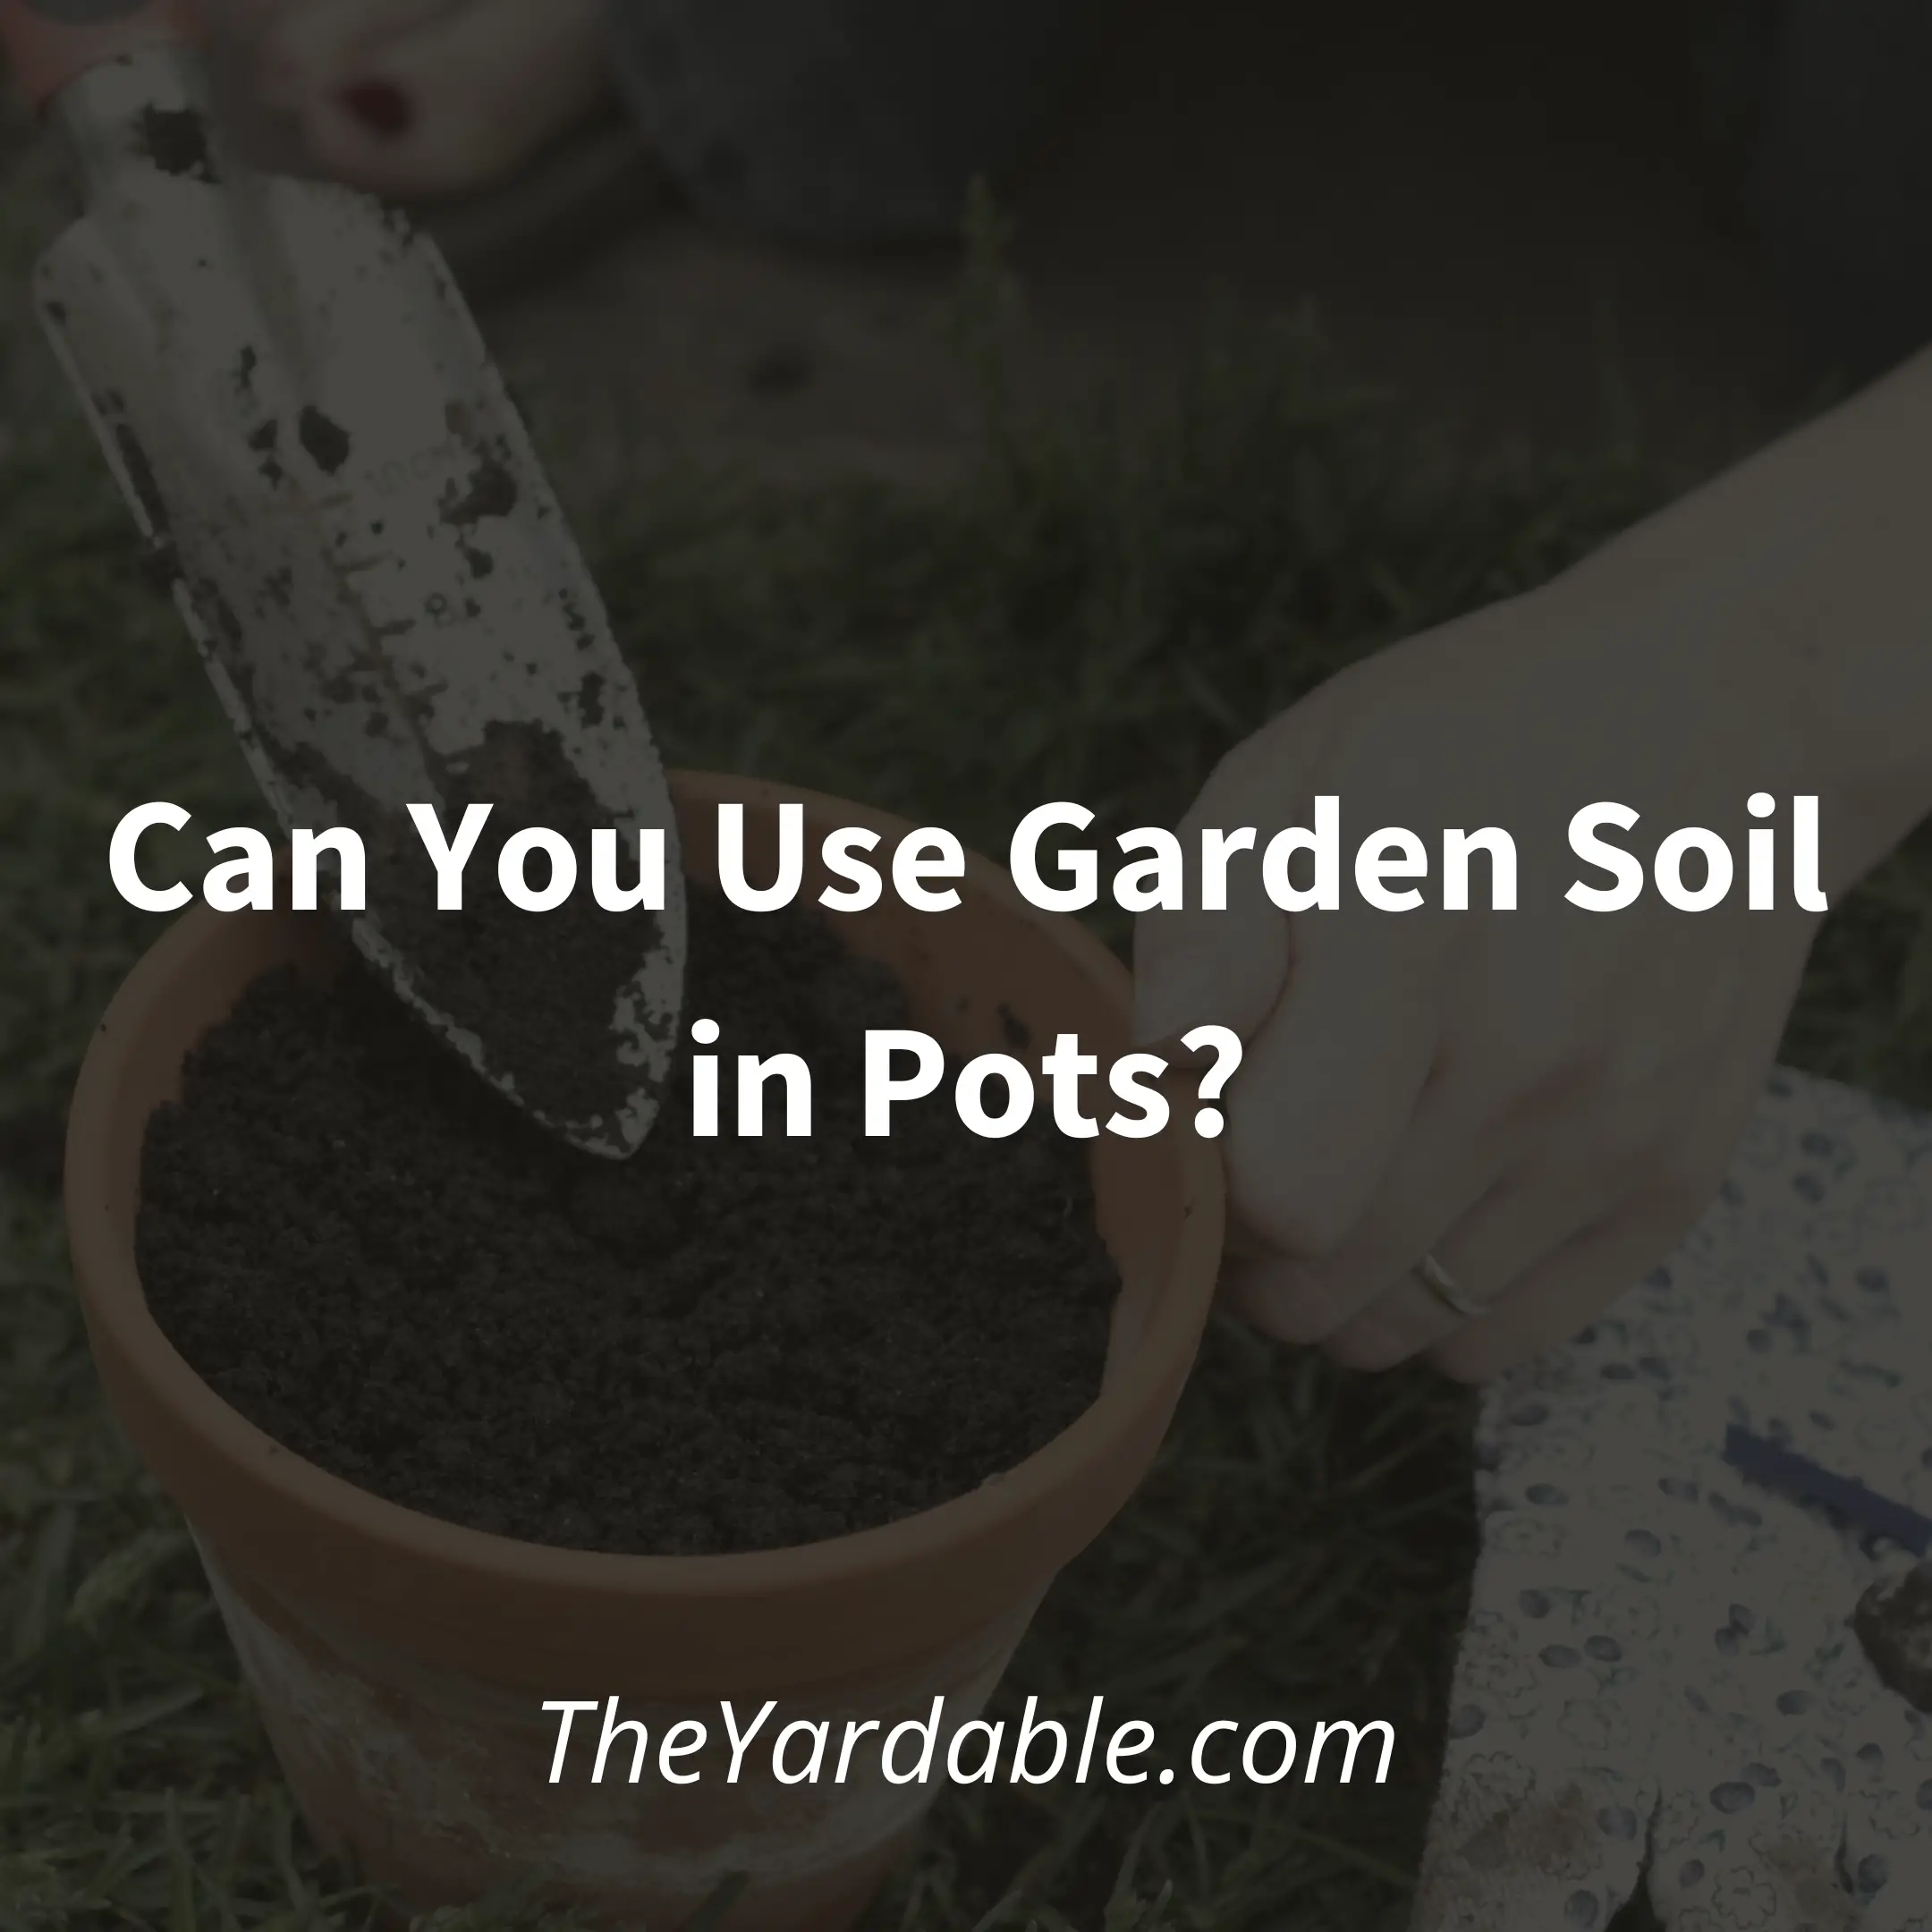 Can I Use Garden Soil in Pots? – What You Need to Know